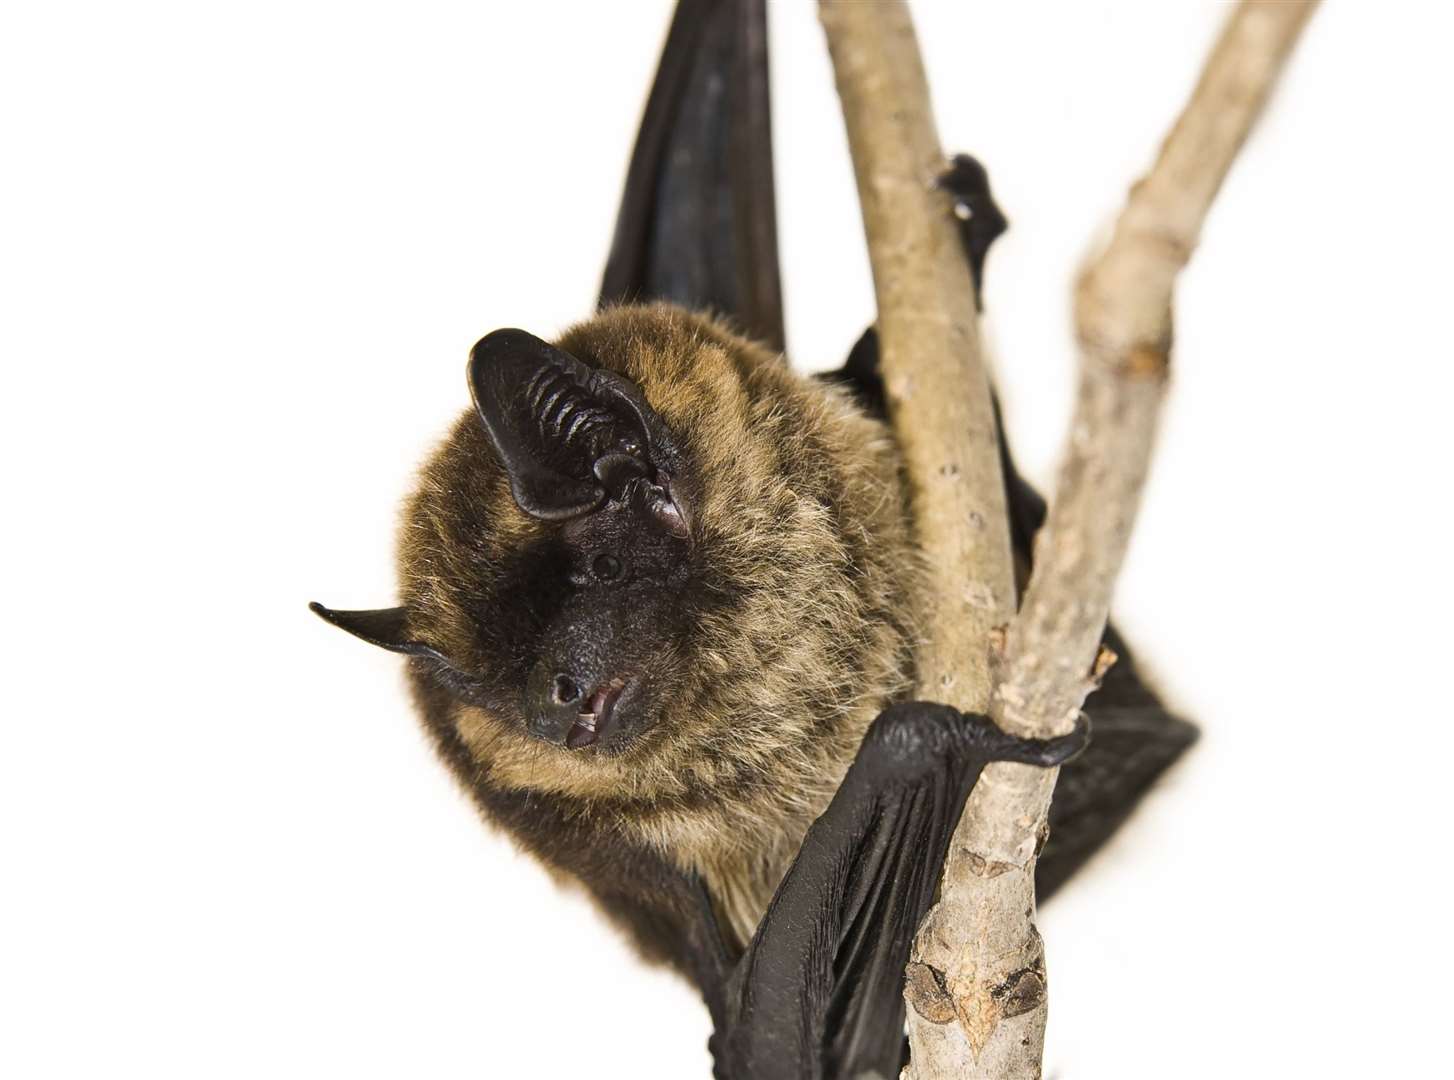 Bats are a protected species